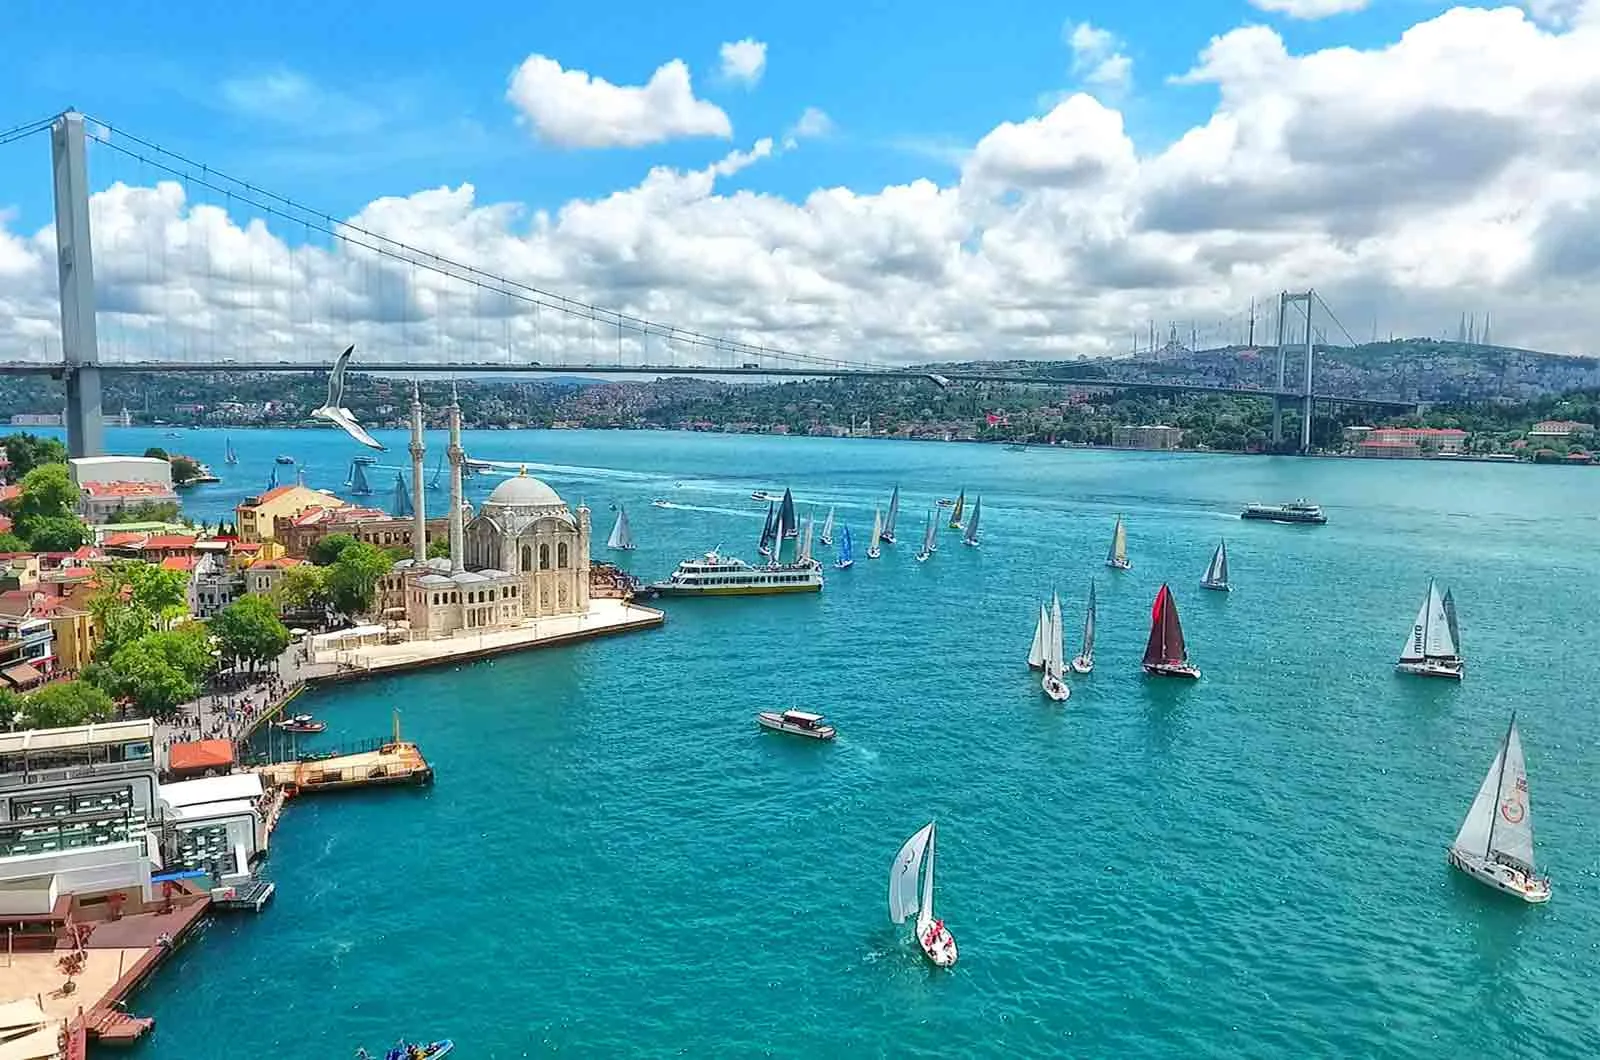 Bosphorus Bridge and sailboats in the Bosphorus Strait and Ortakoy Mosque. Concept of English to Turkish translation.